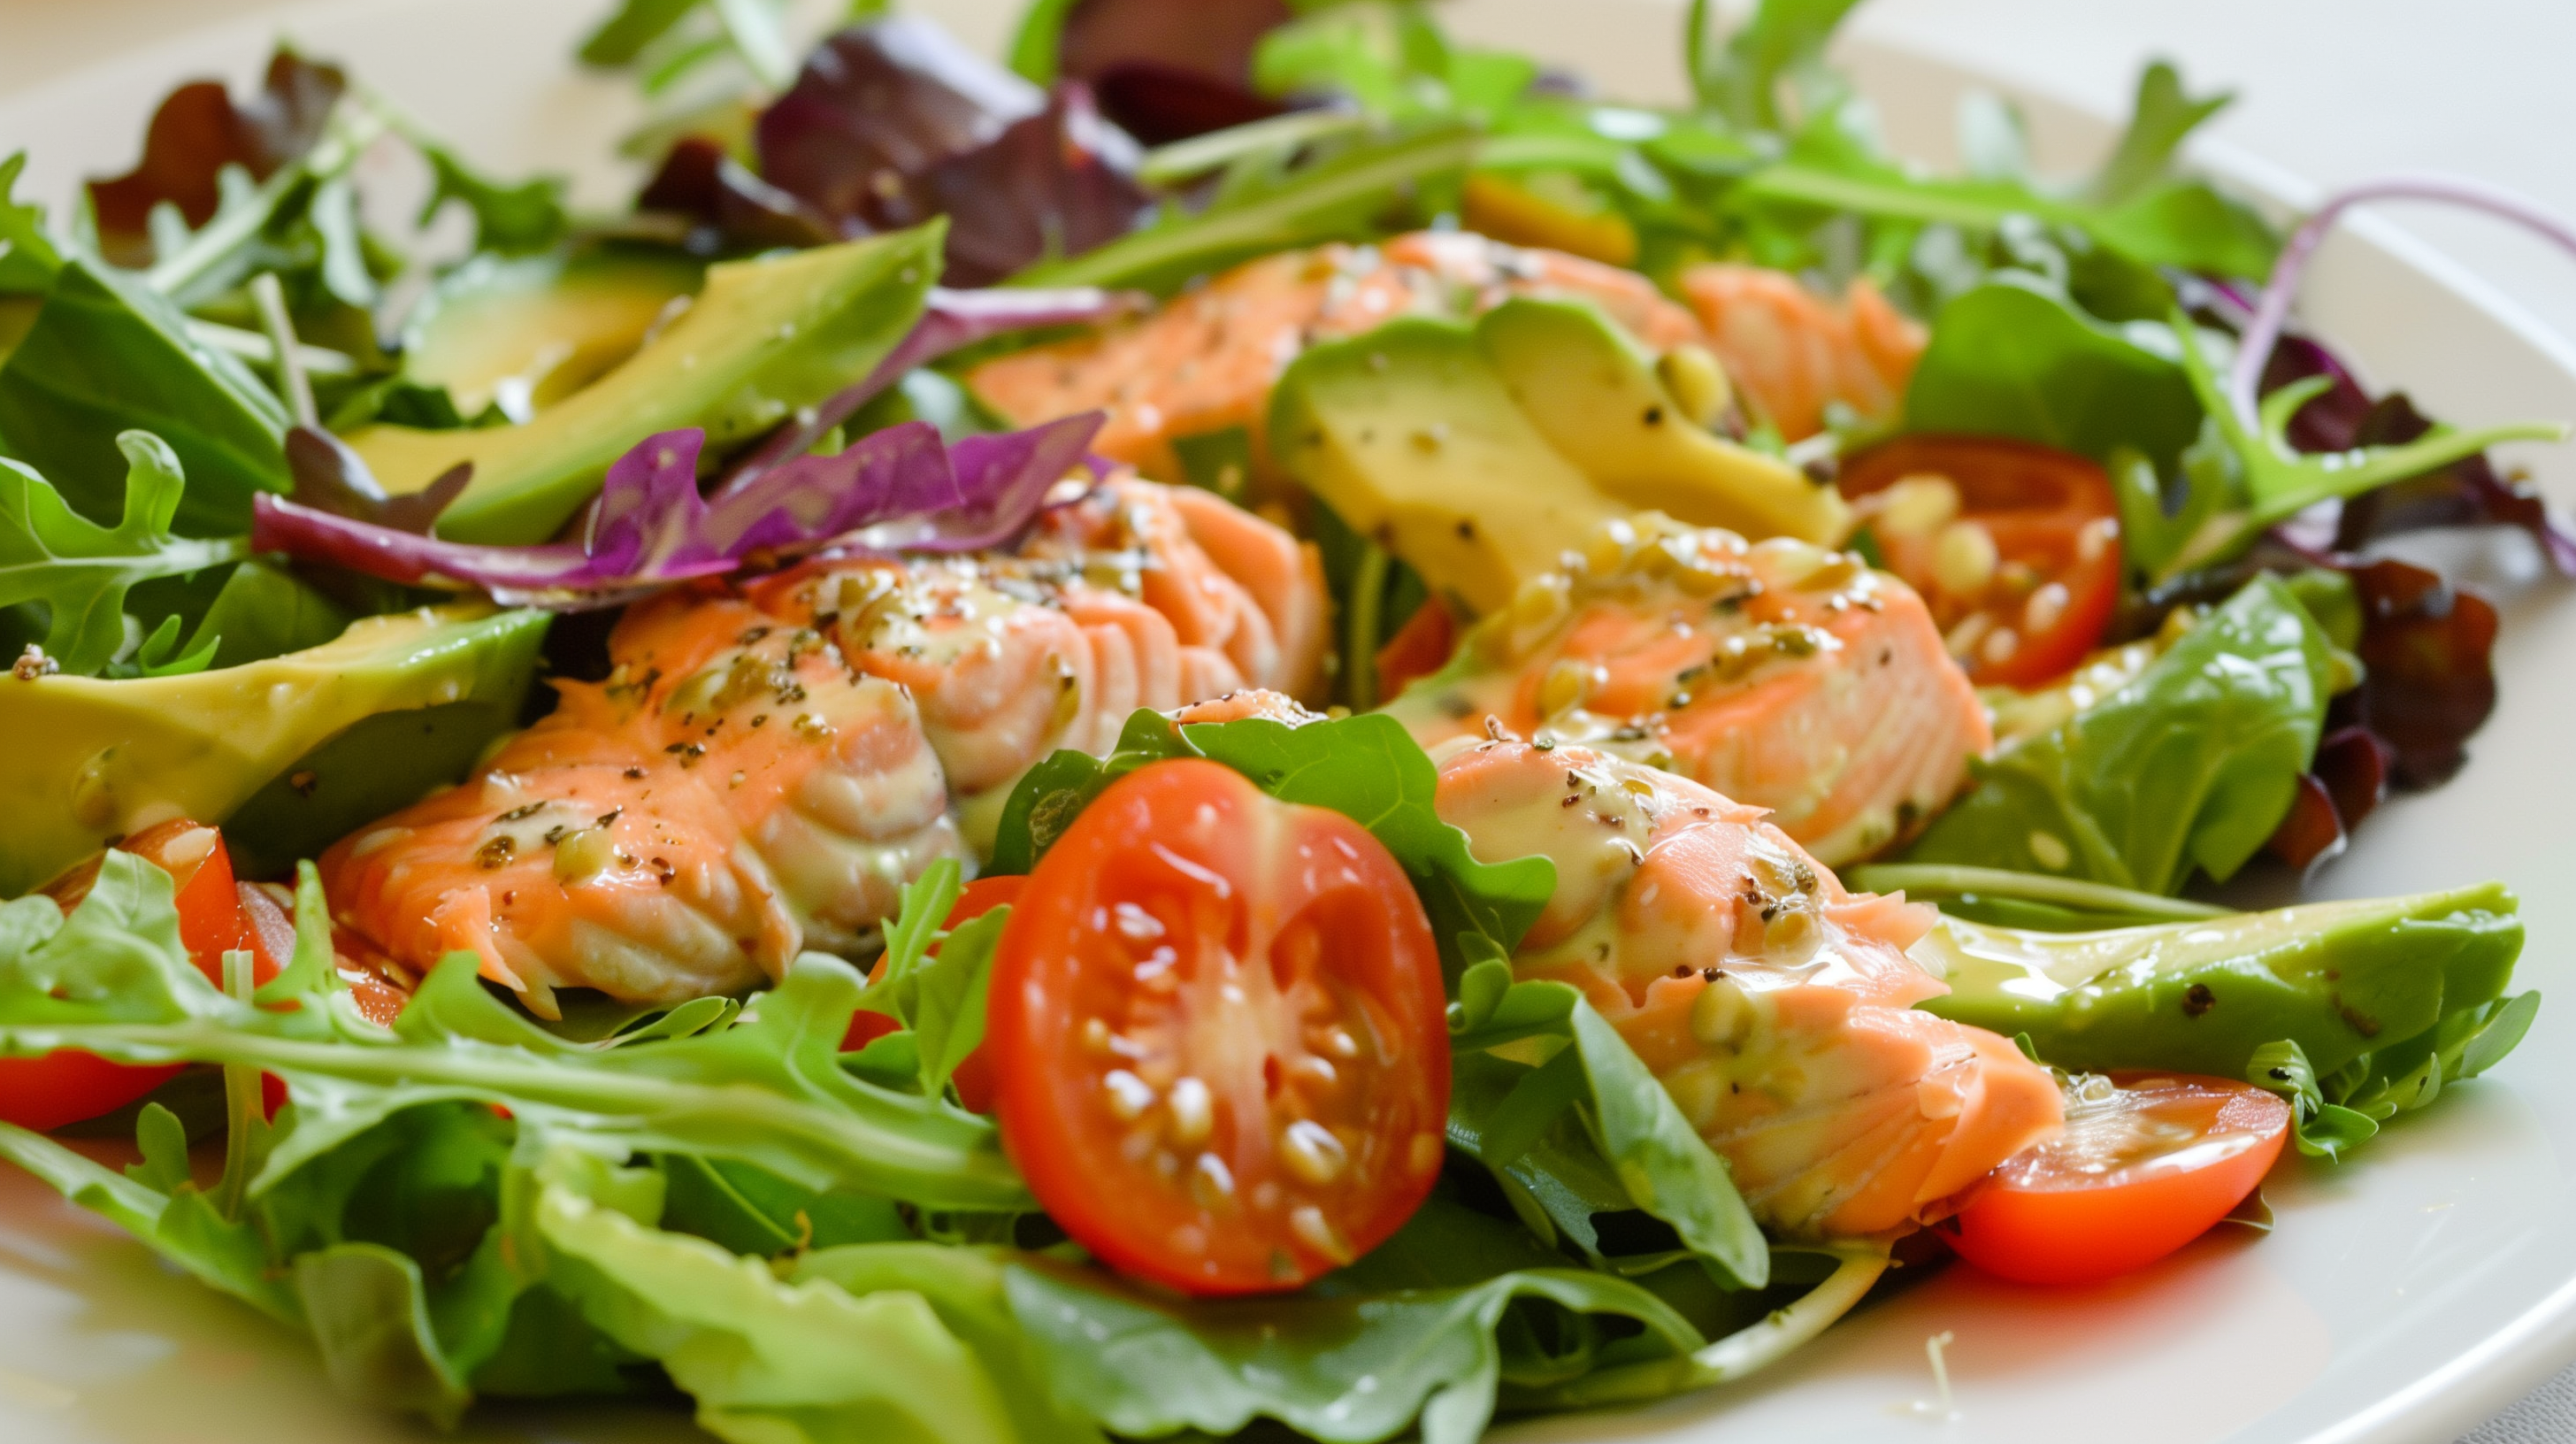 a mixed greens salad with salmon, tomato., and avocado